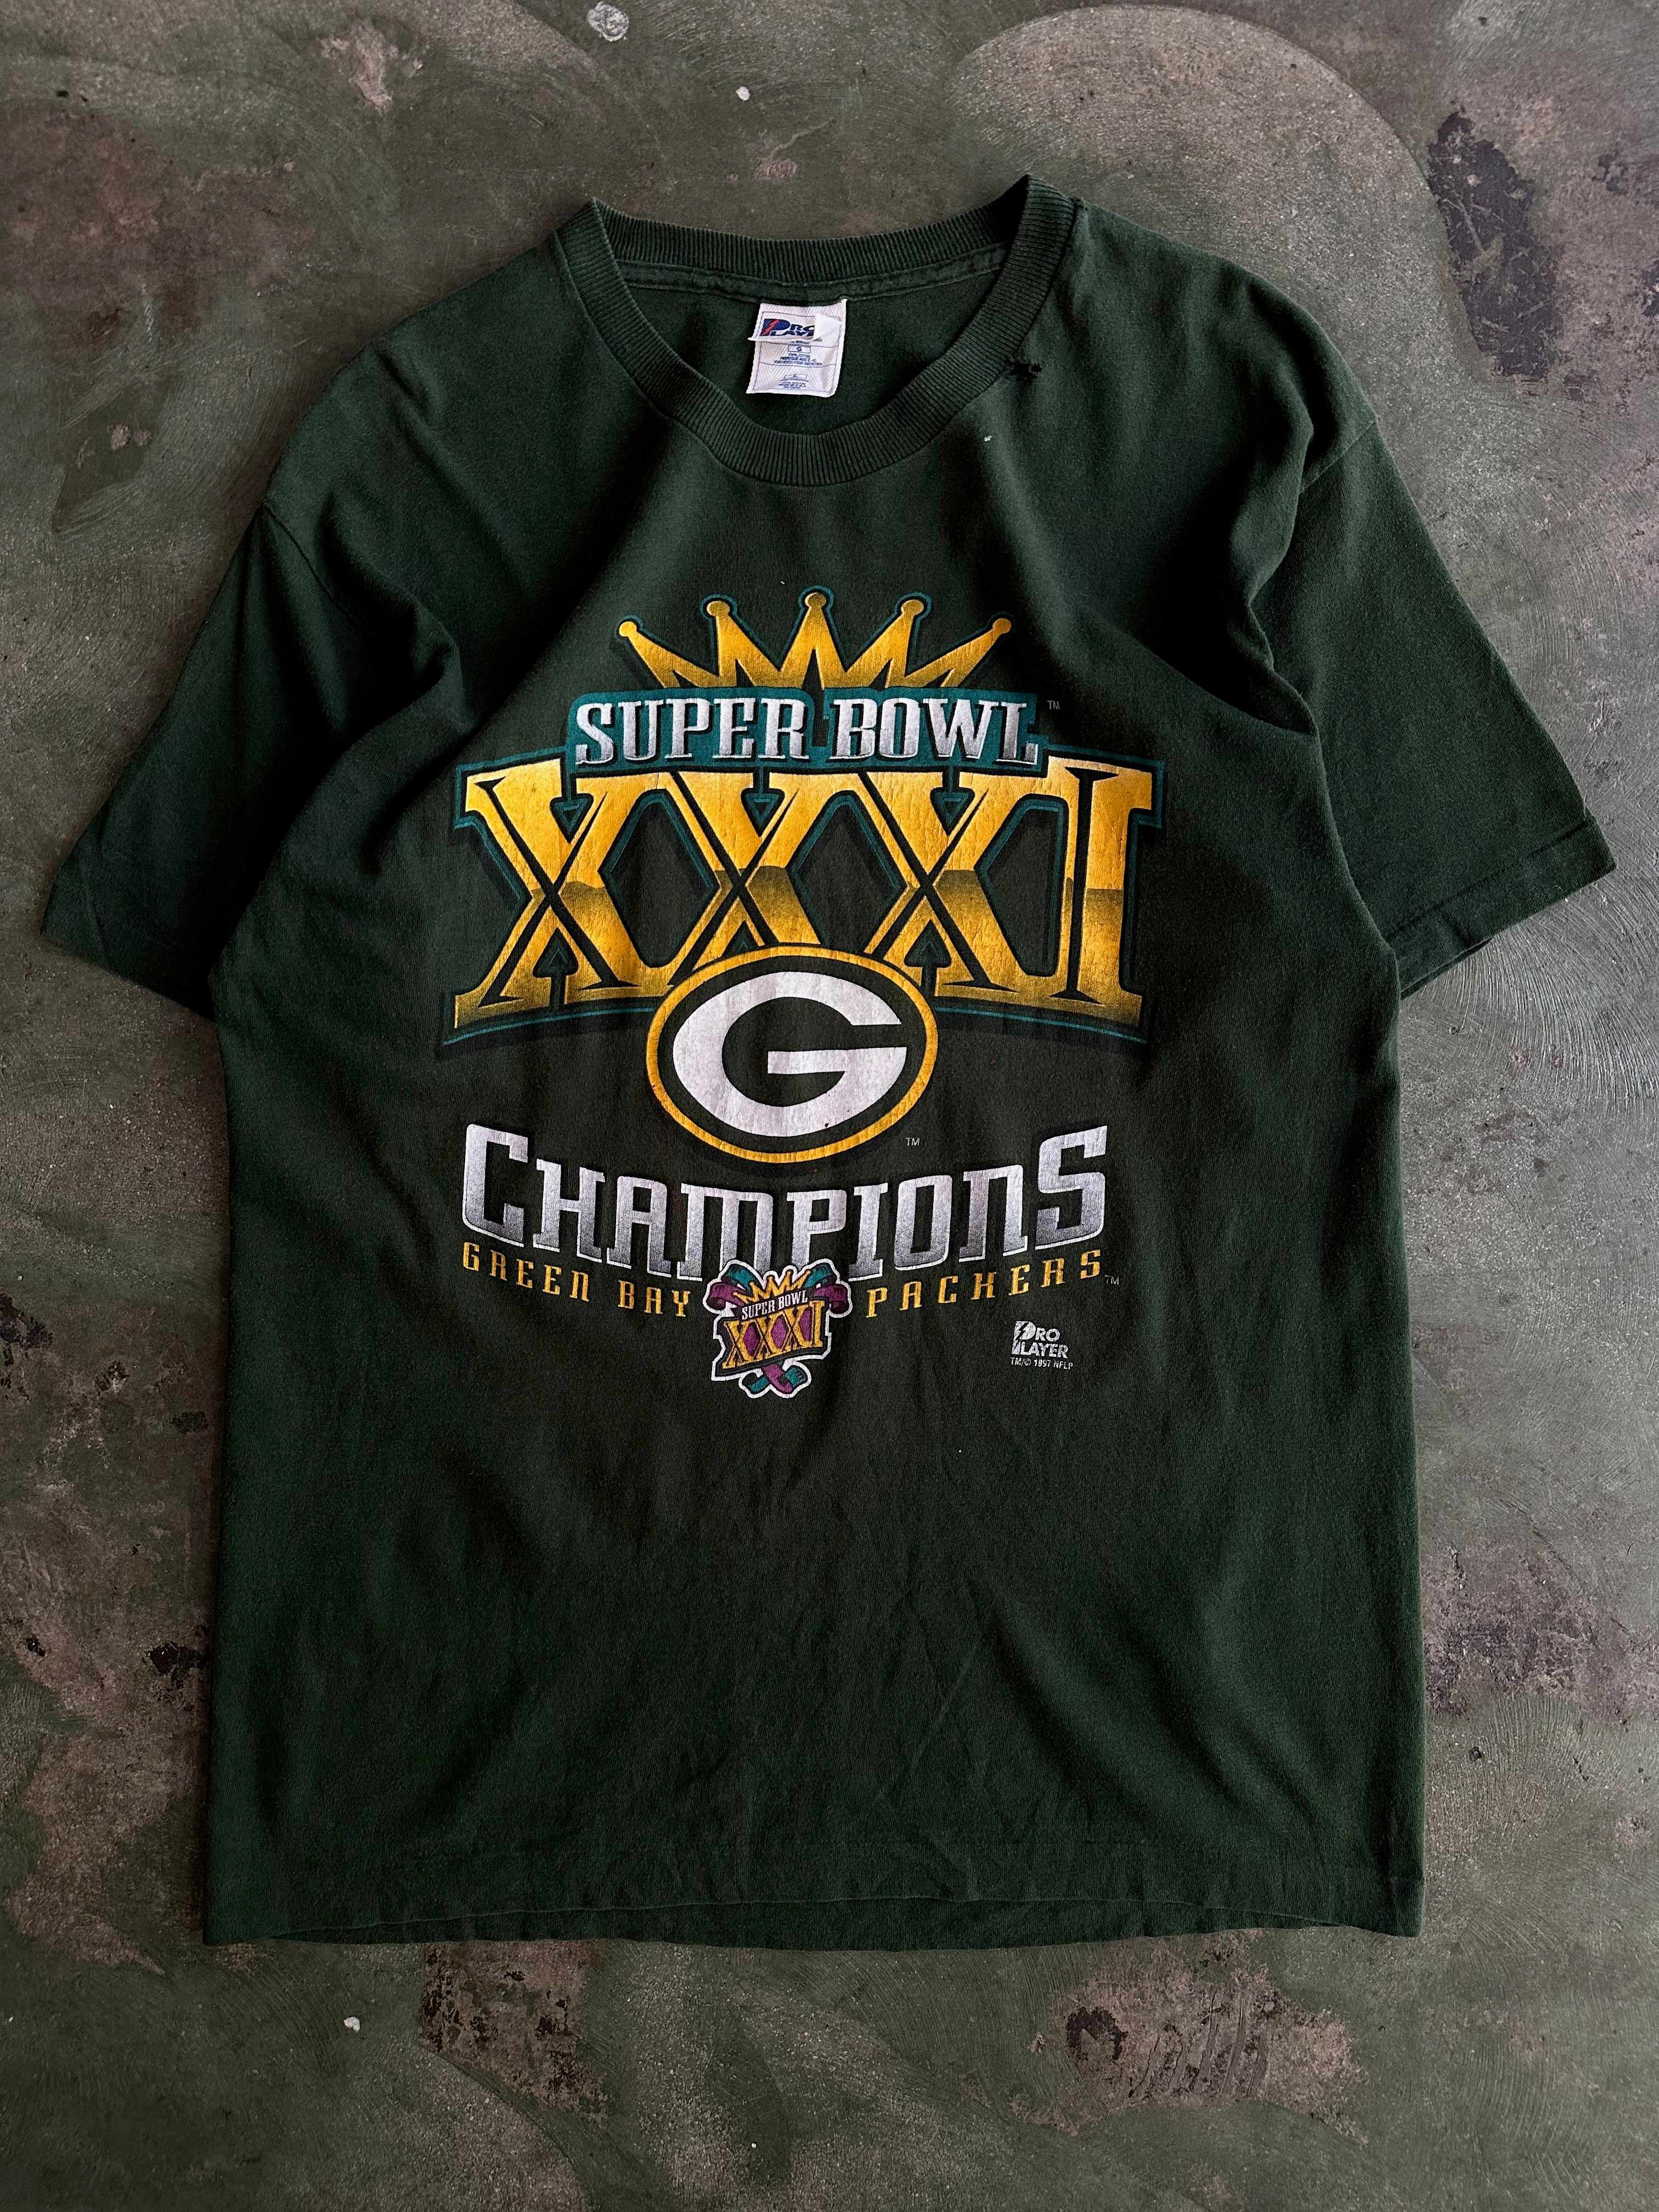 Vintage 1997 NFL Green Bay Packers Super Bowl Champions Nfc North